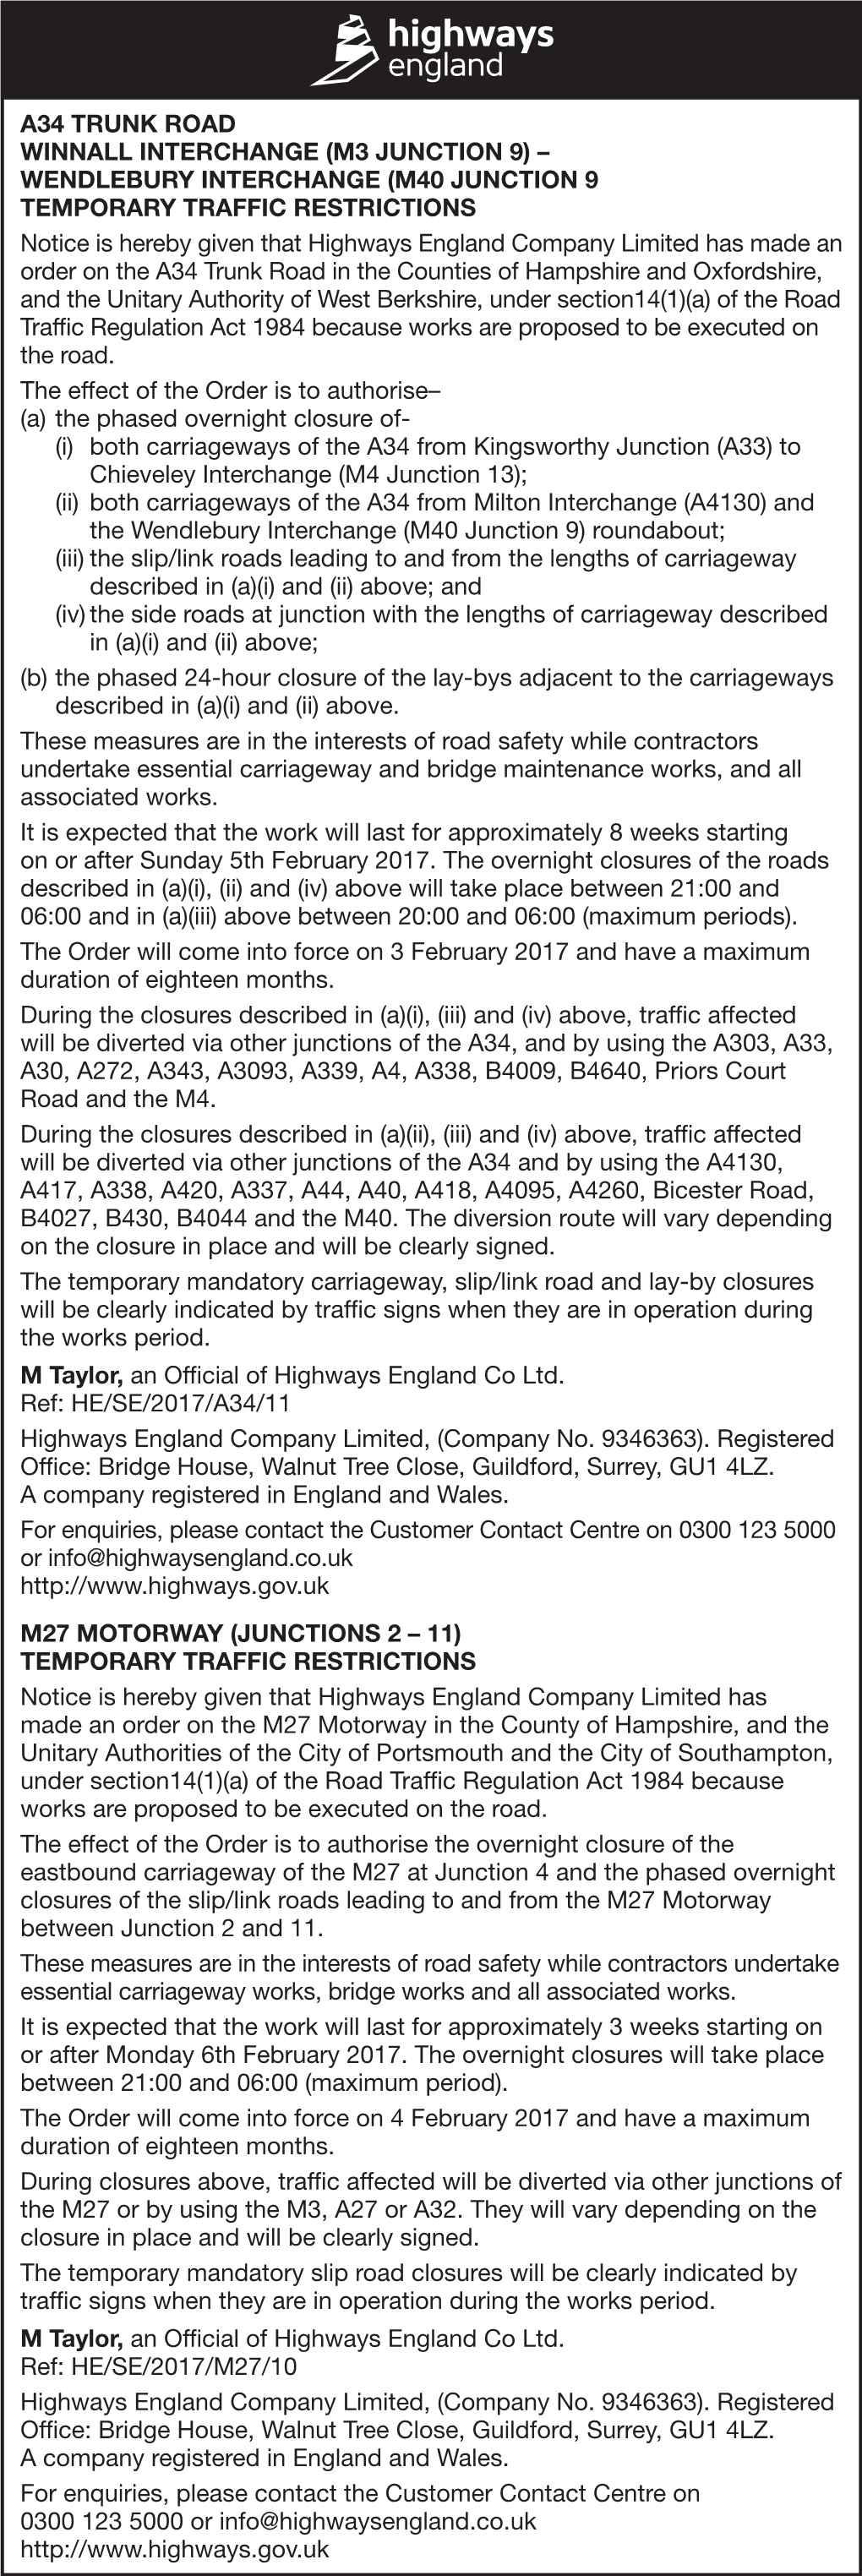 M40 Junction 9 Temporary Traffic Restrictions